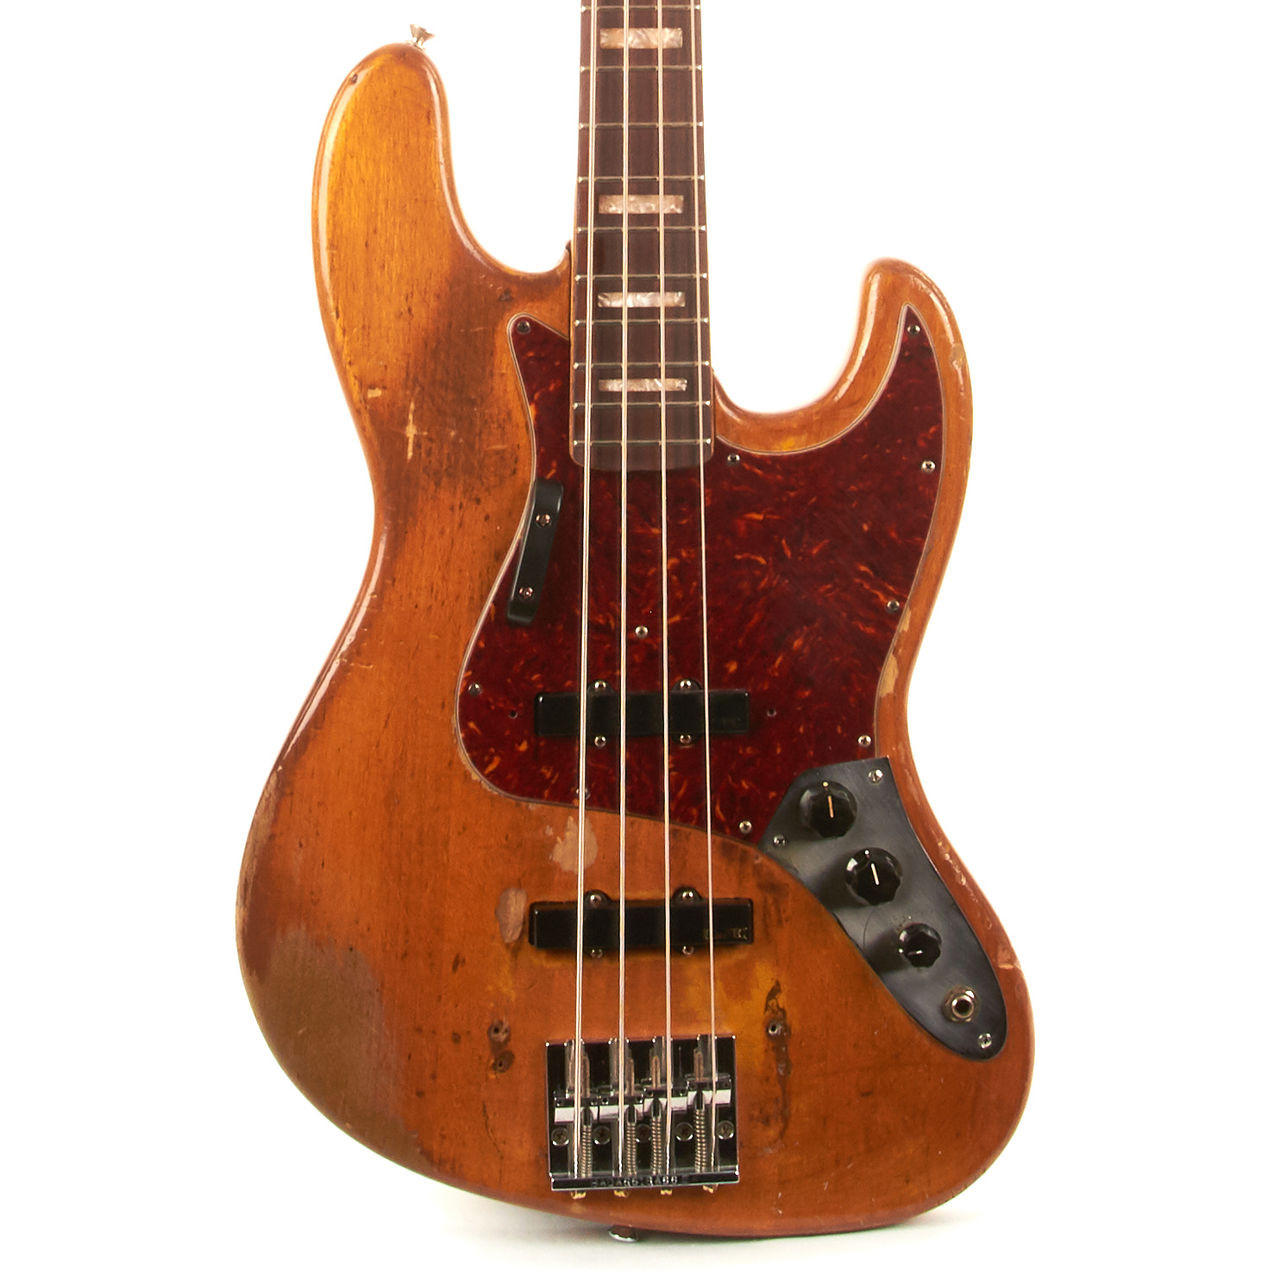 Offer or Auction 3/13 : Rare 1966 Saturday Night Special JBC-32 Lawsuit  Jazz Bass